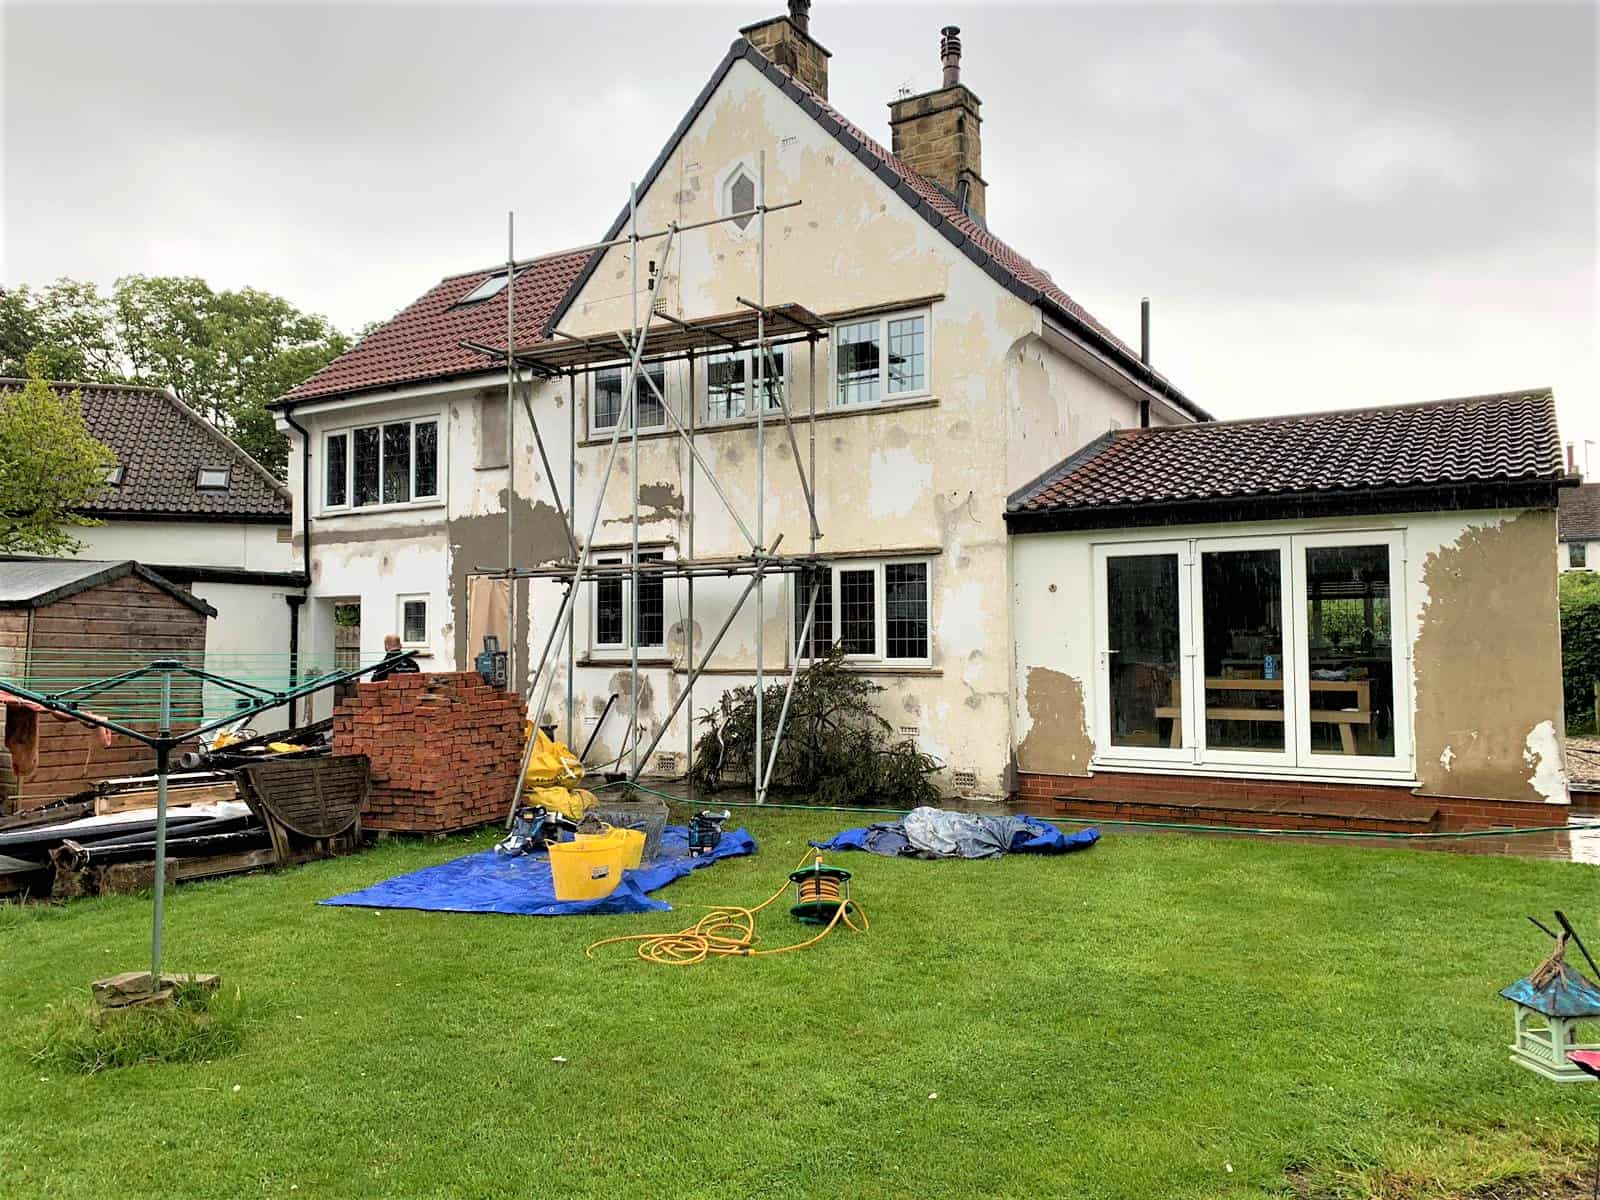 A house in Harrogate in need of TLC and exterior house painting